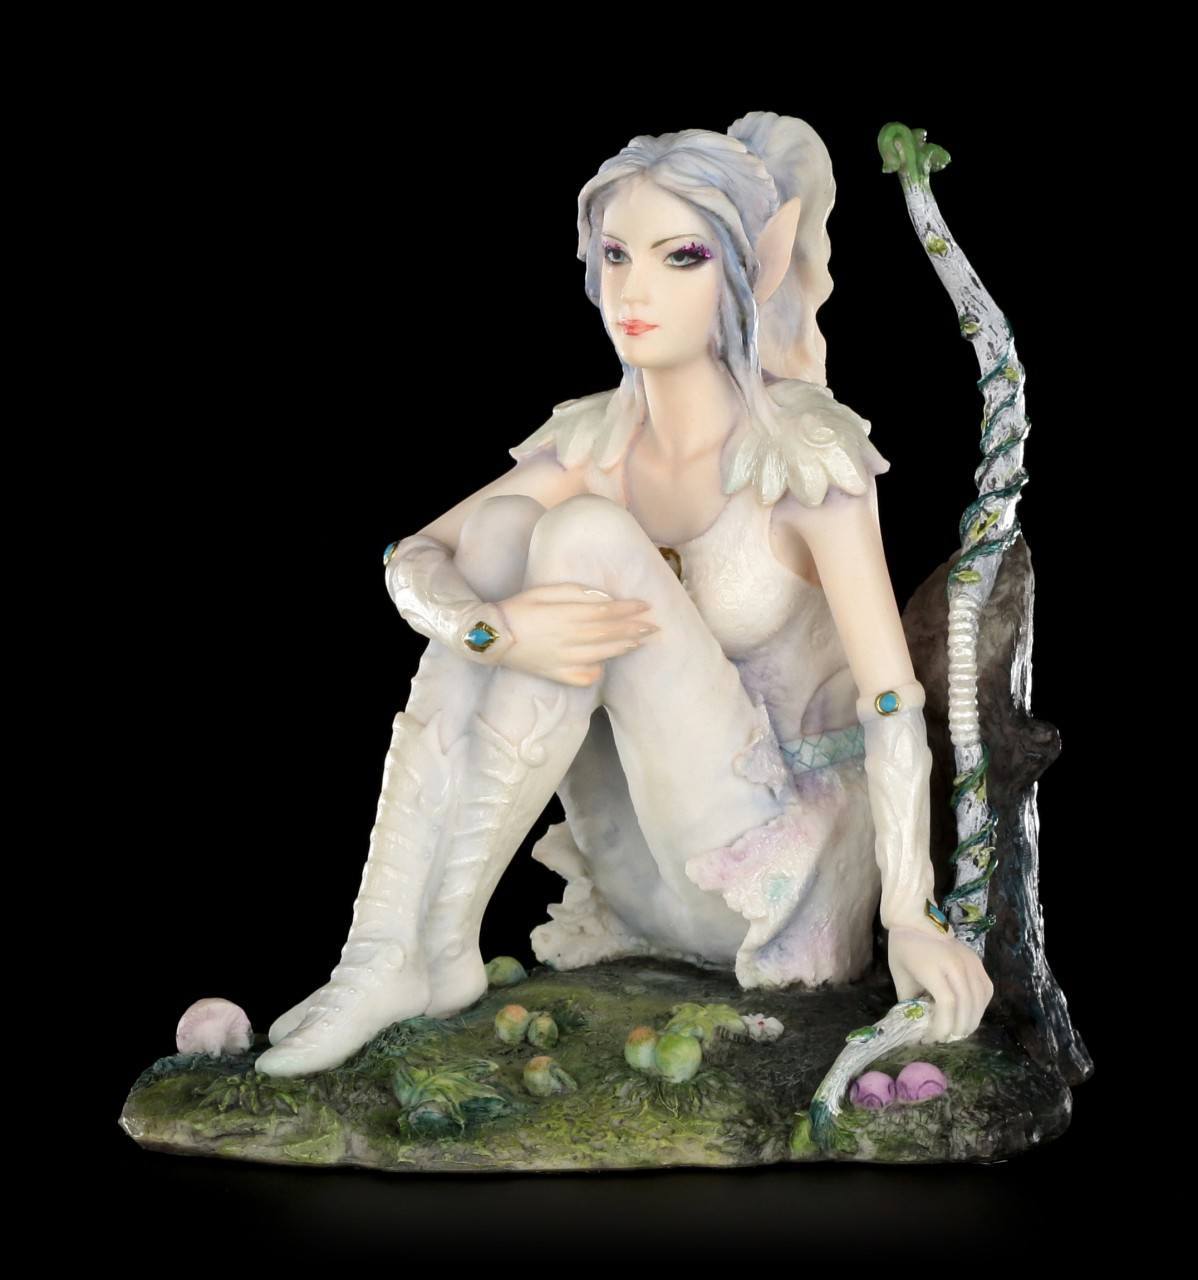 Forrest Fairy Figurine - Ariel with Bow